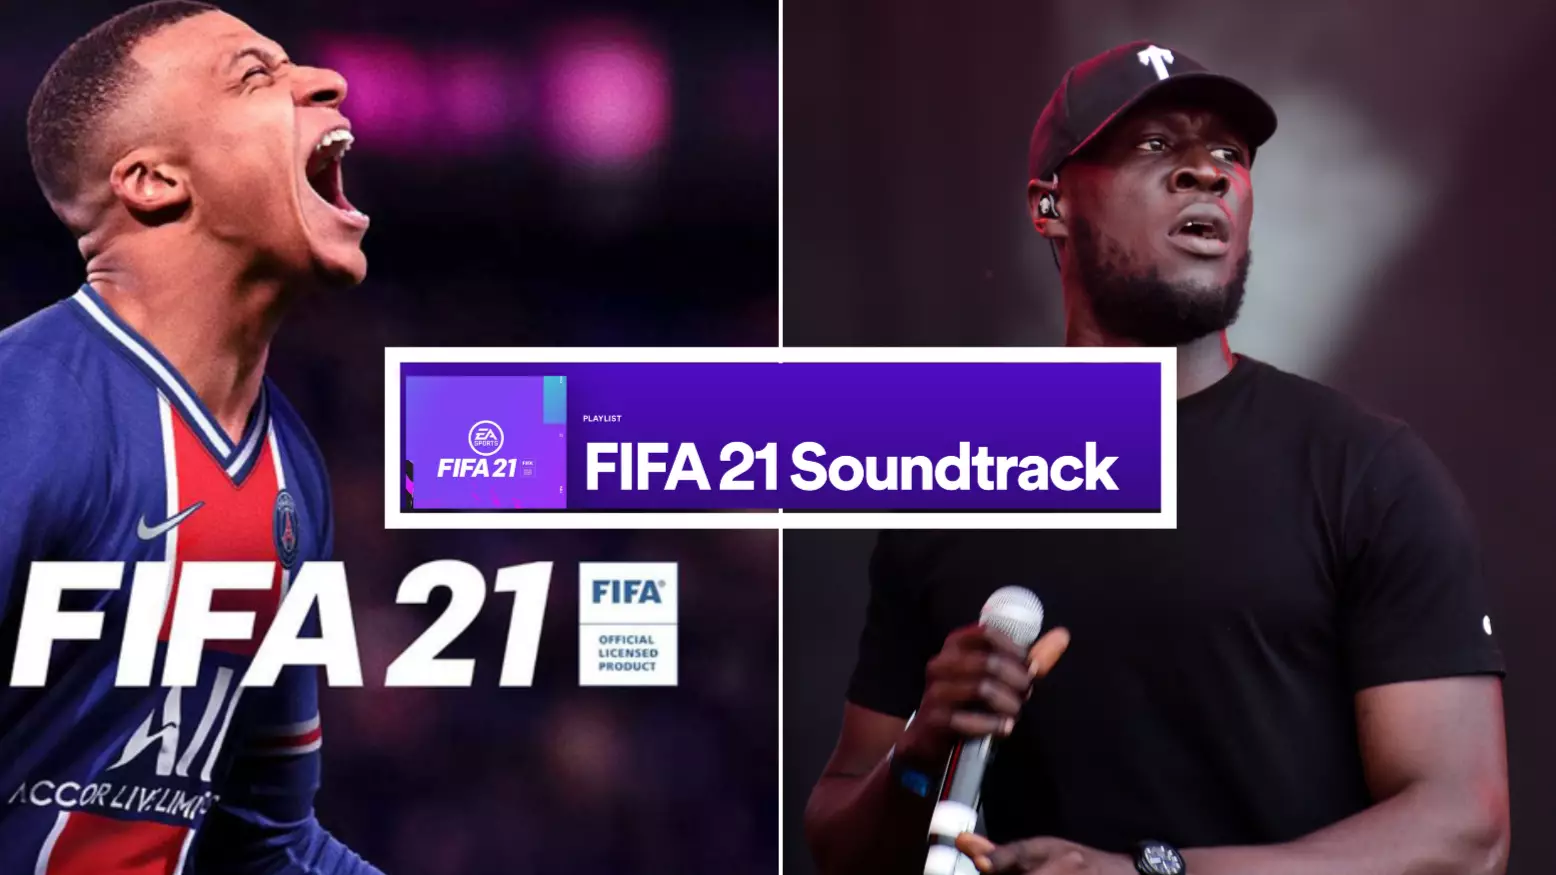 FIFA 21 Soundtrack Leaked Online Ahead Of Official Release